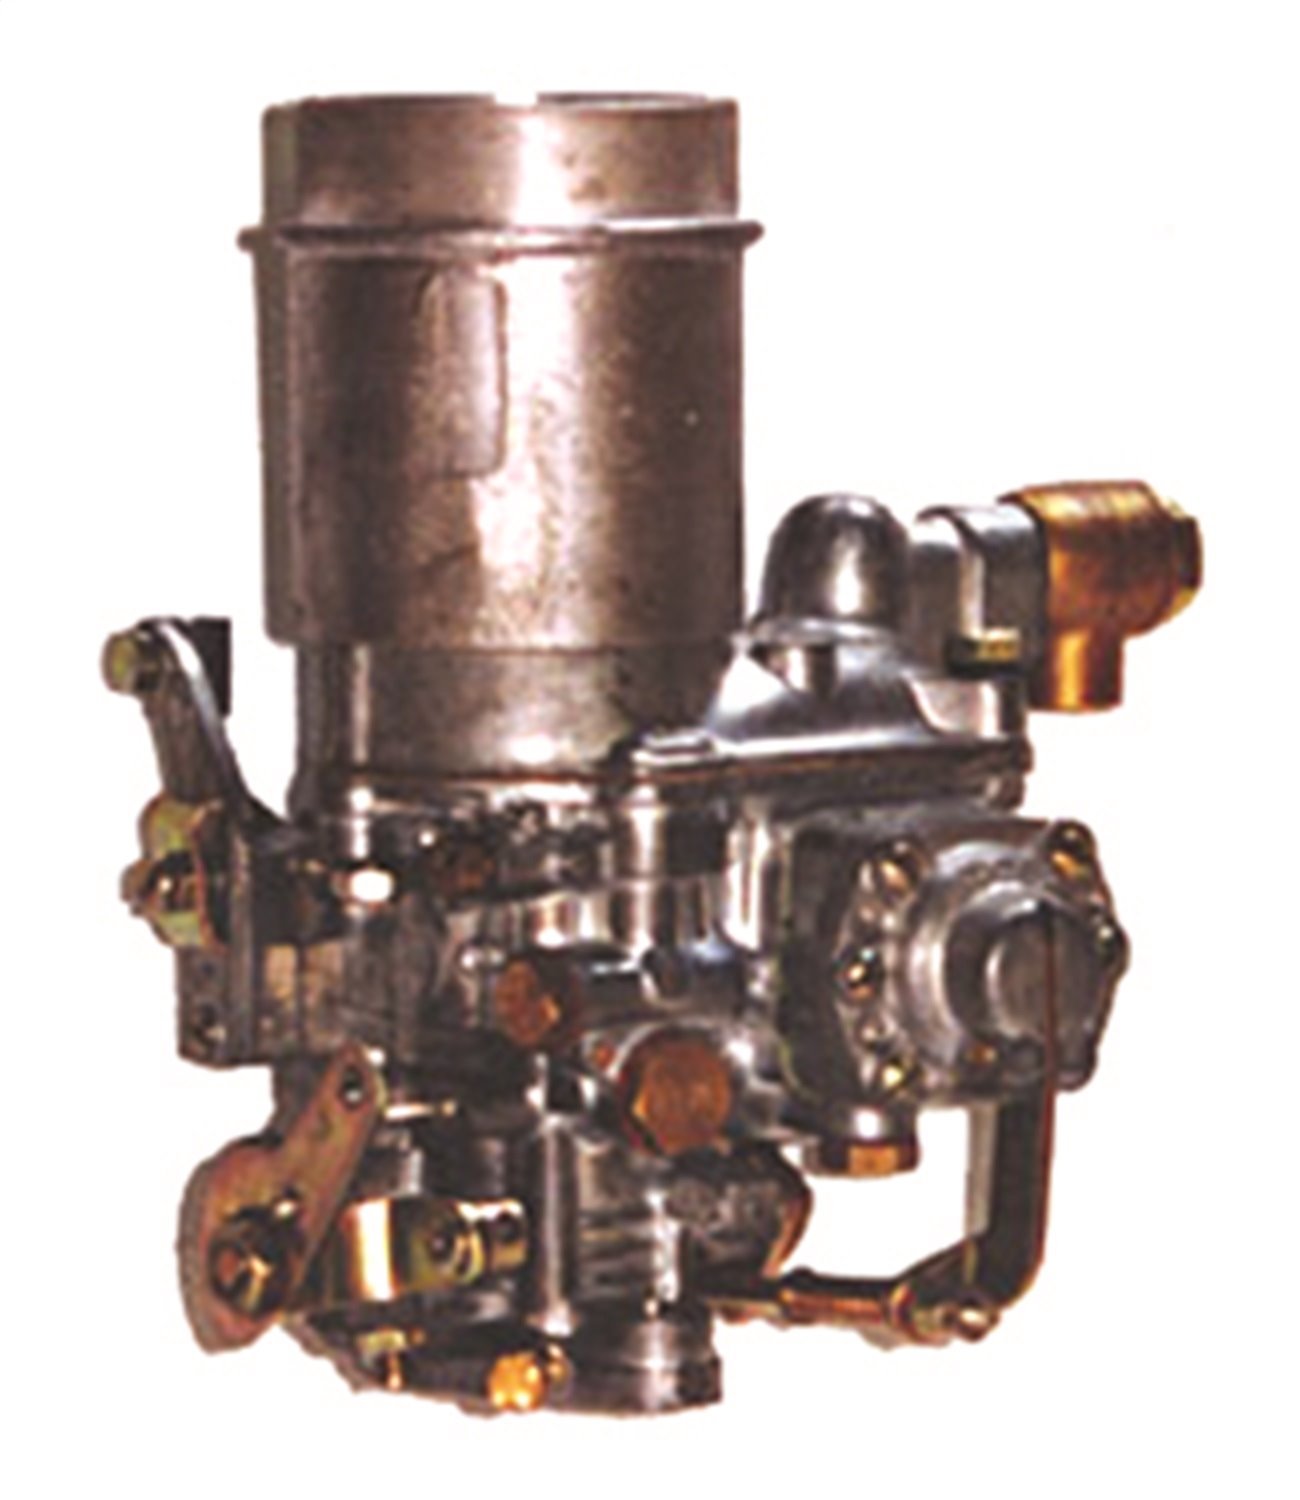 This Solex-design carburetor from Omix-ADA fits L-head 4 cylinder engines in 46-49 Willys CJ2Aand 49-53 Willys CJ3A.